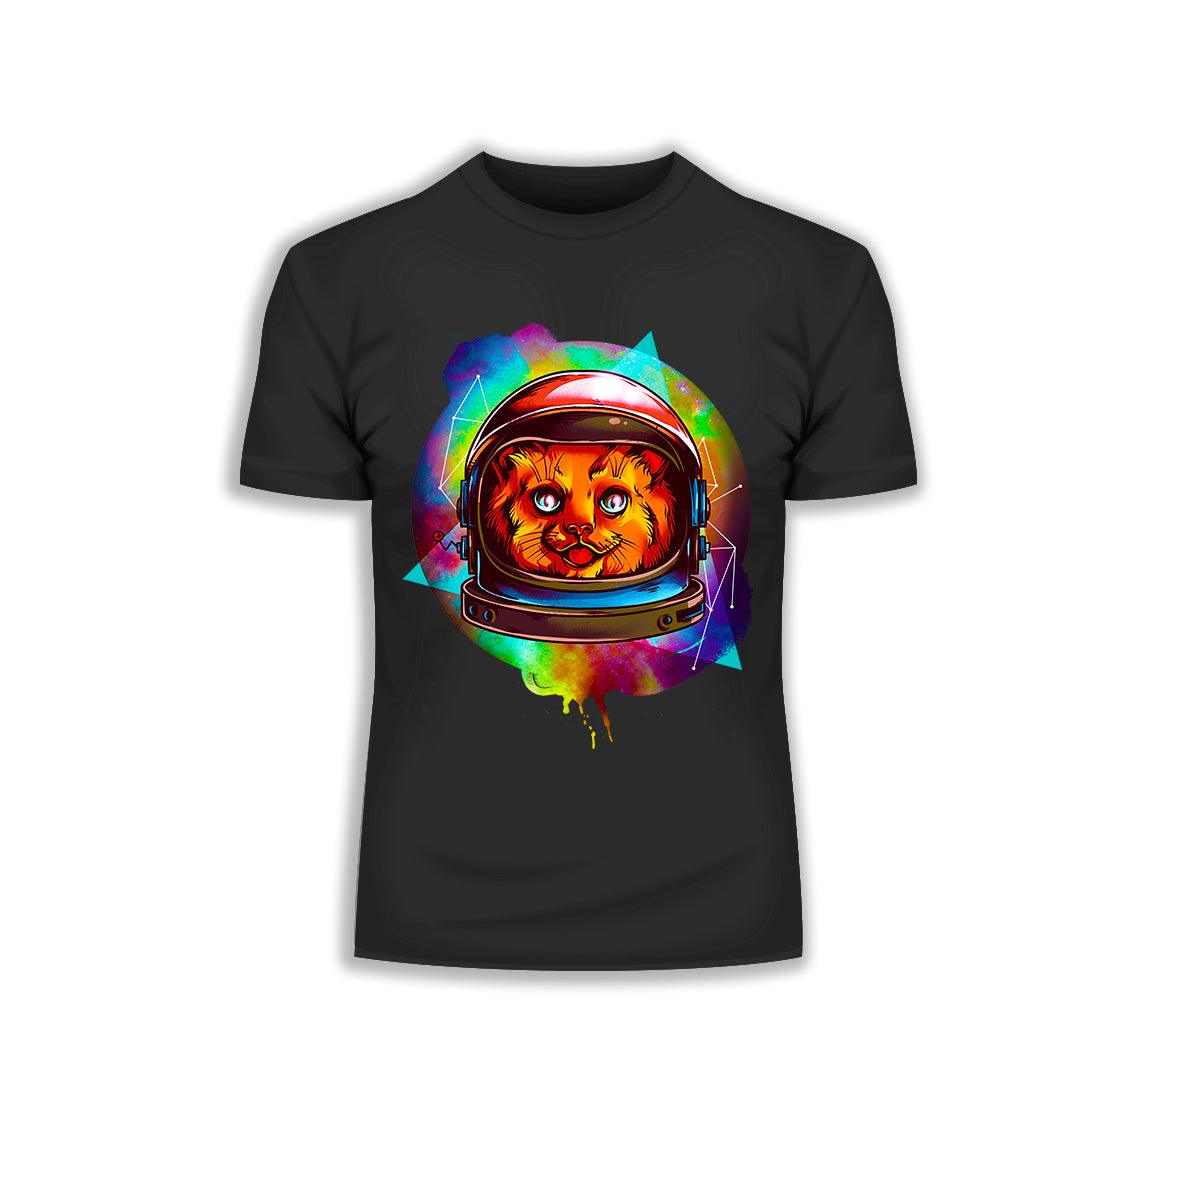 Awesome Cosmic Kitty T-Shirts with an Attitude - Kuzi Tees